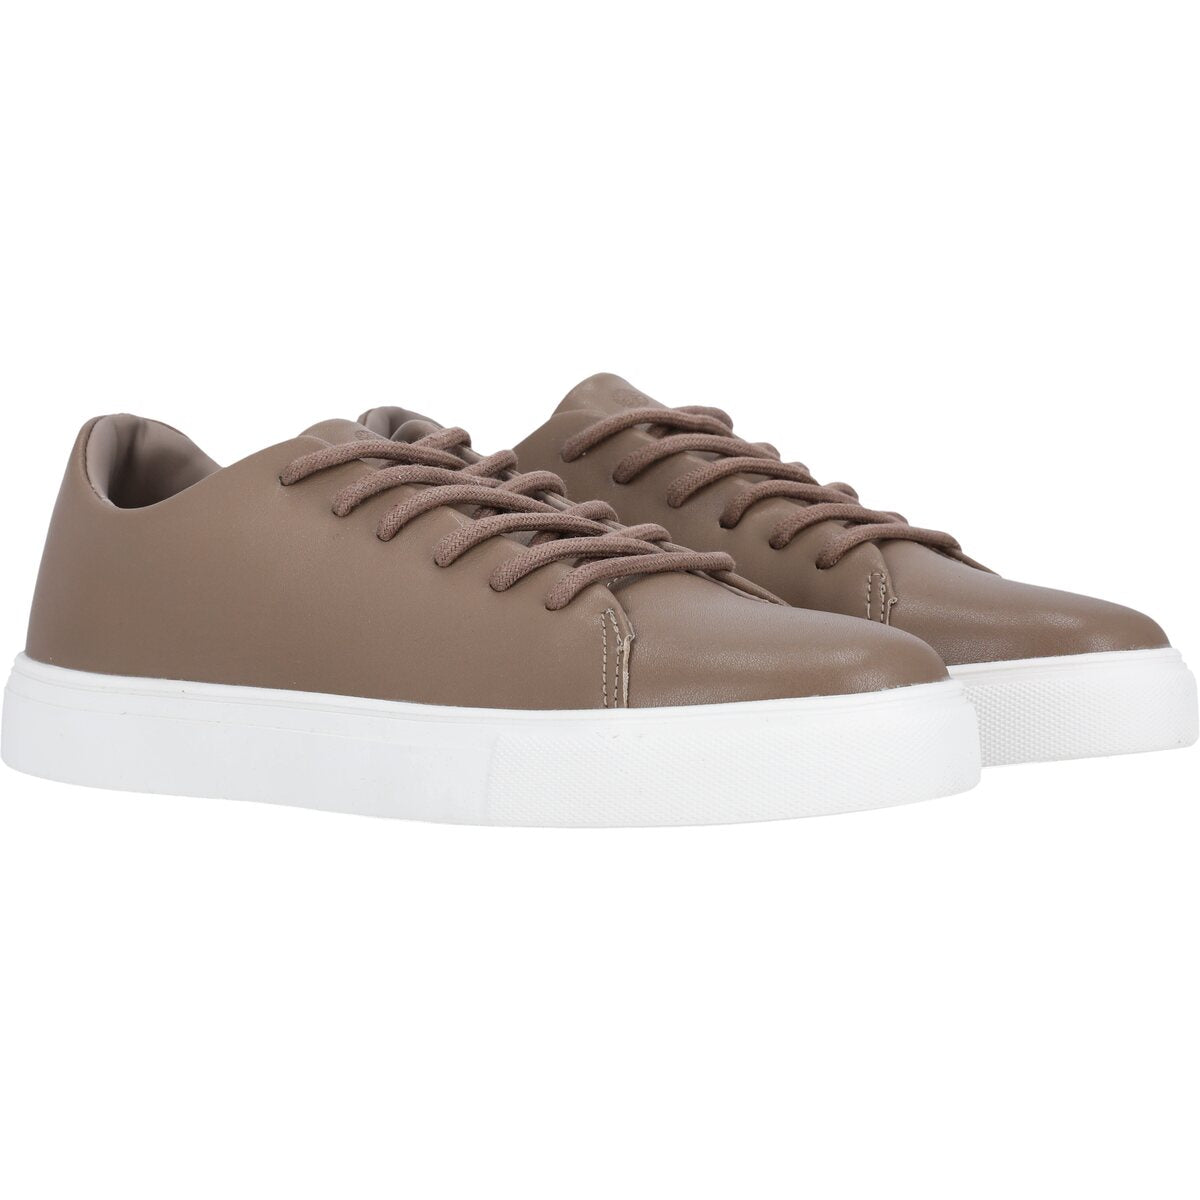 Athlecia Christinia Classic Sneakers - Taupe 5 Shaws Department Stores